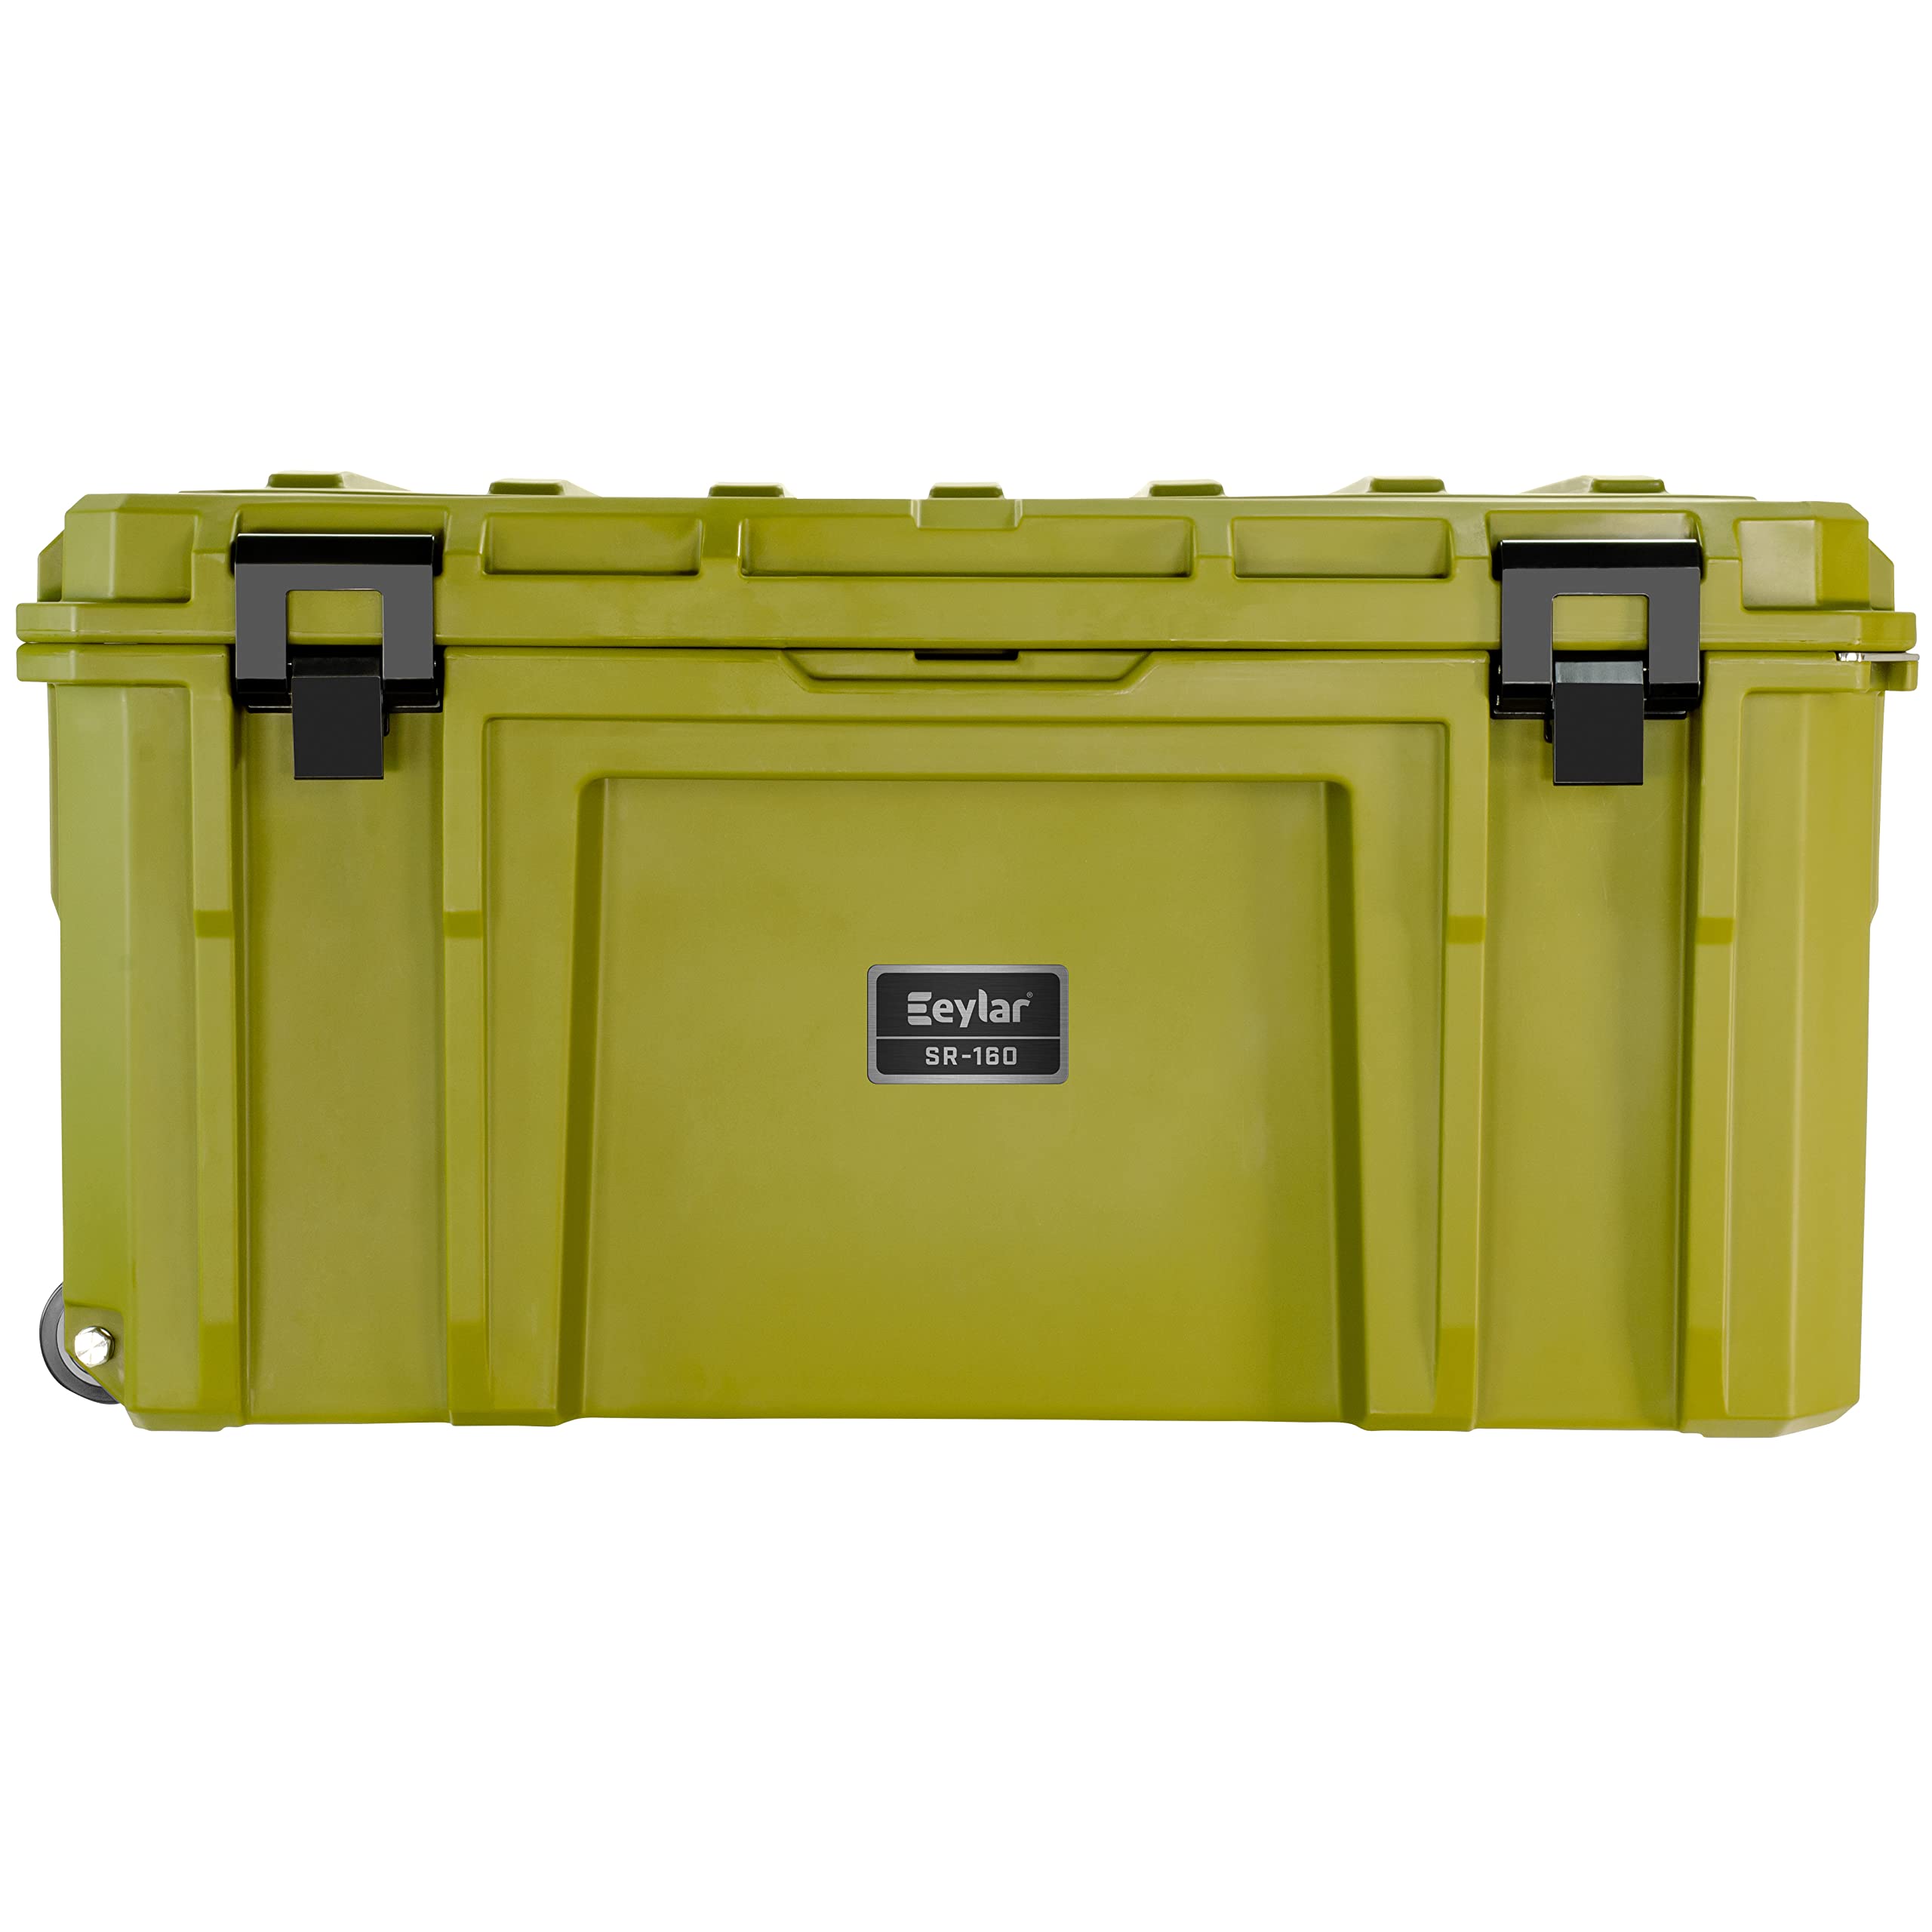 SR-160 XL Crossover Overland Roller Cargo Case, Equipment Hard Case, Roto Molded, Stackable with Pad-Lock Hasp, Strap Mountable, TSA Standard, IPX4 Rated, 160 Liters (Green)